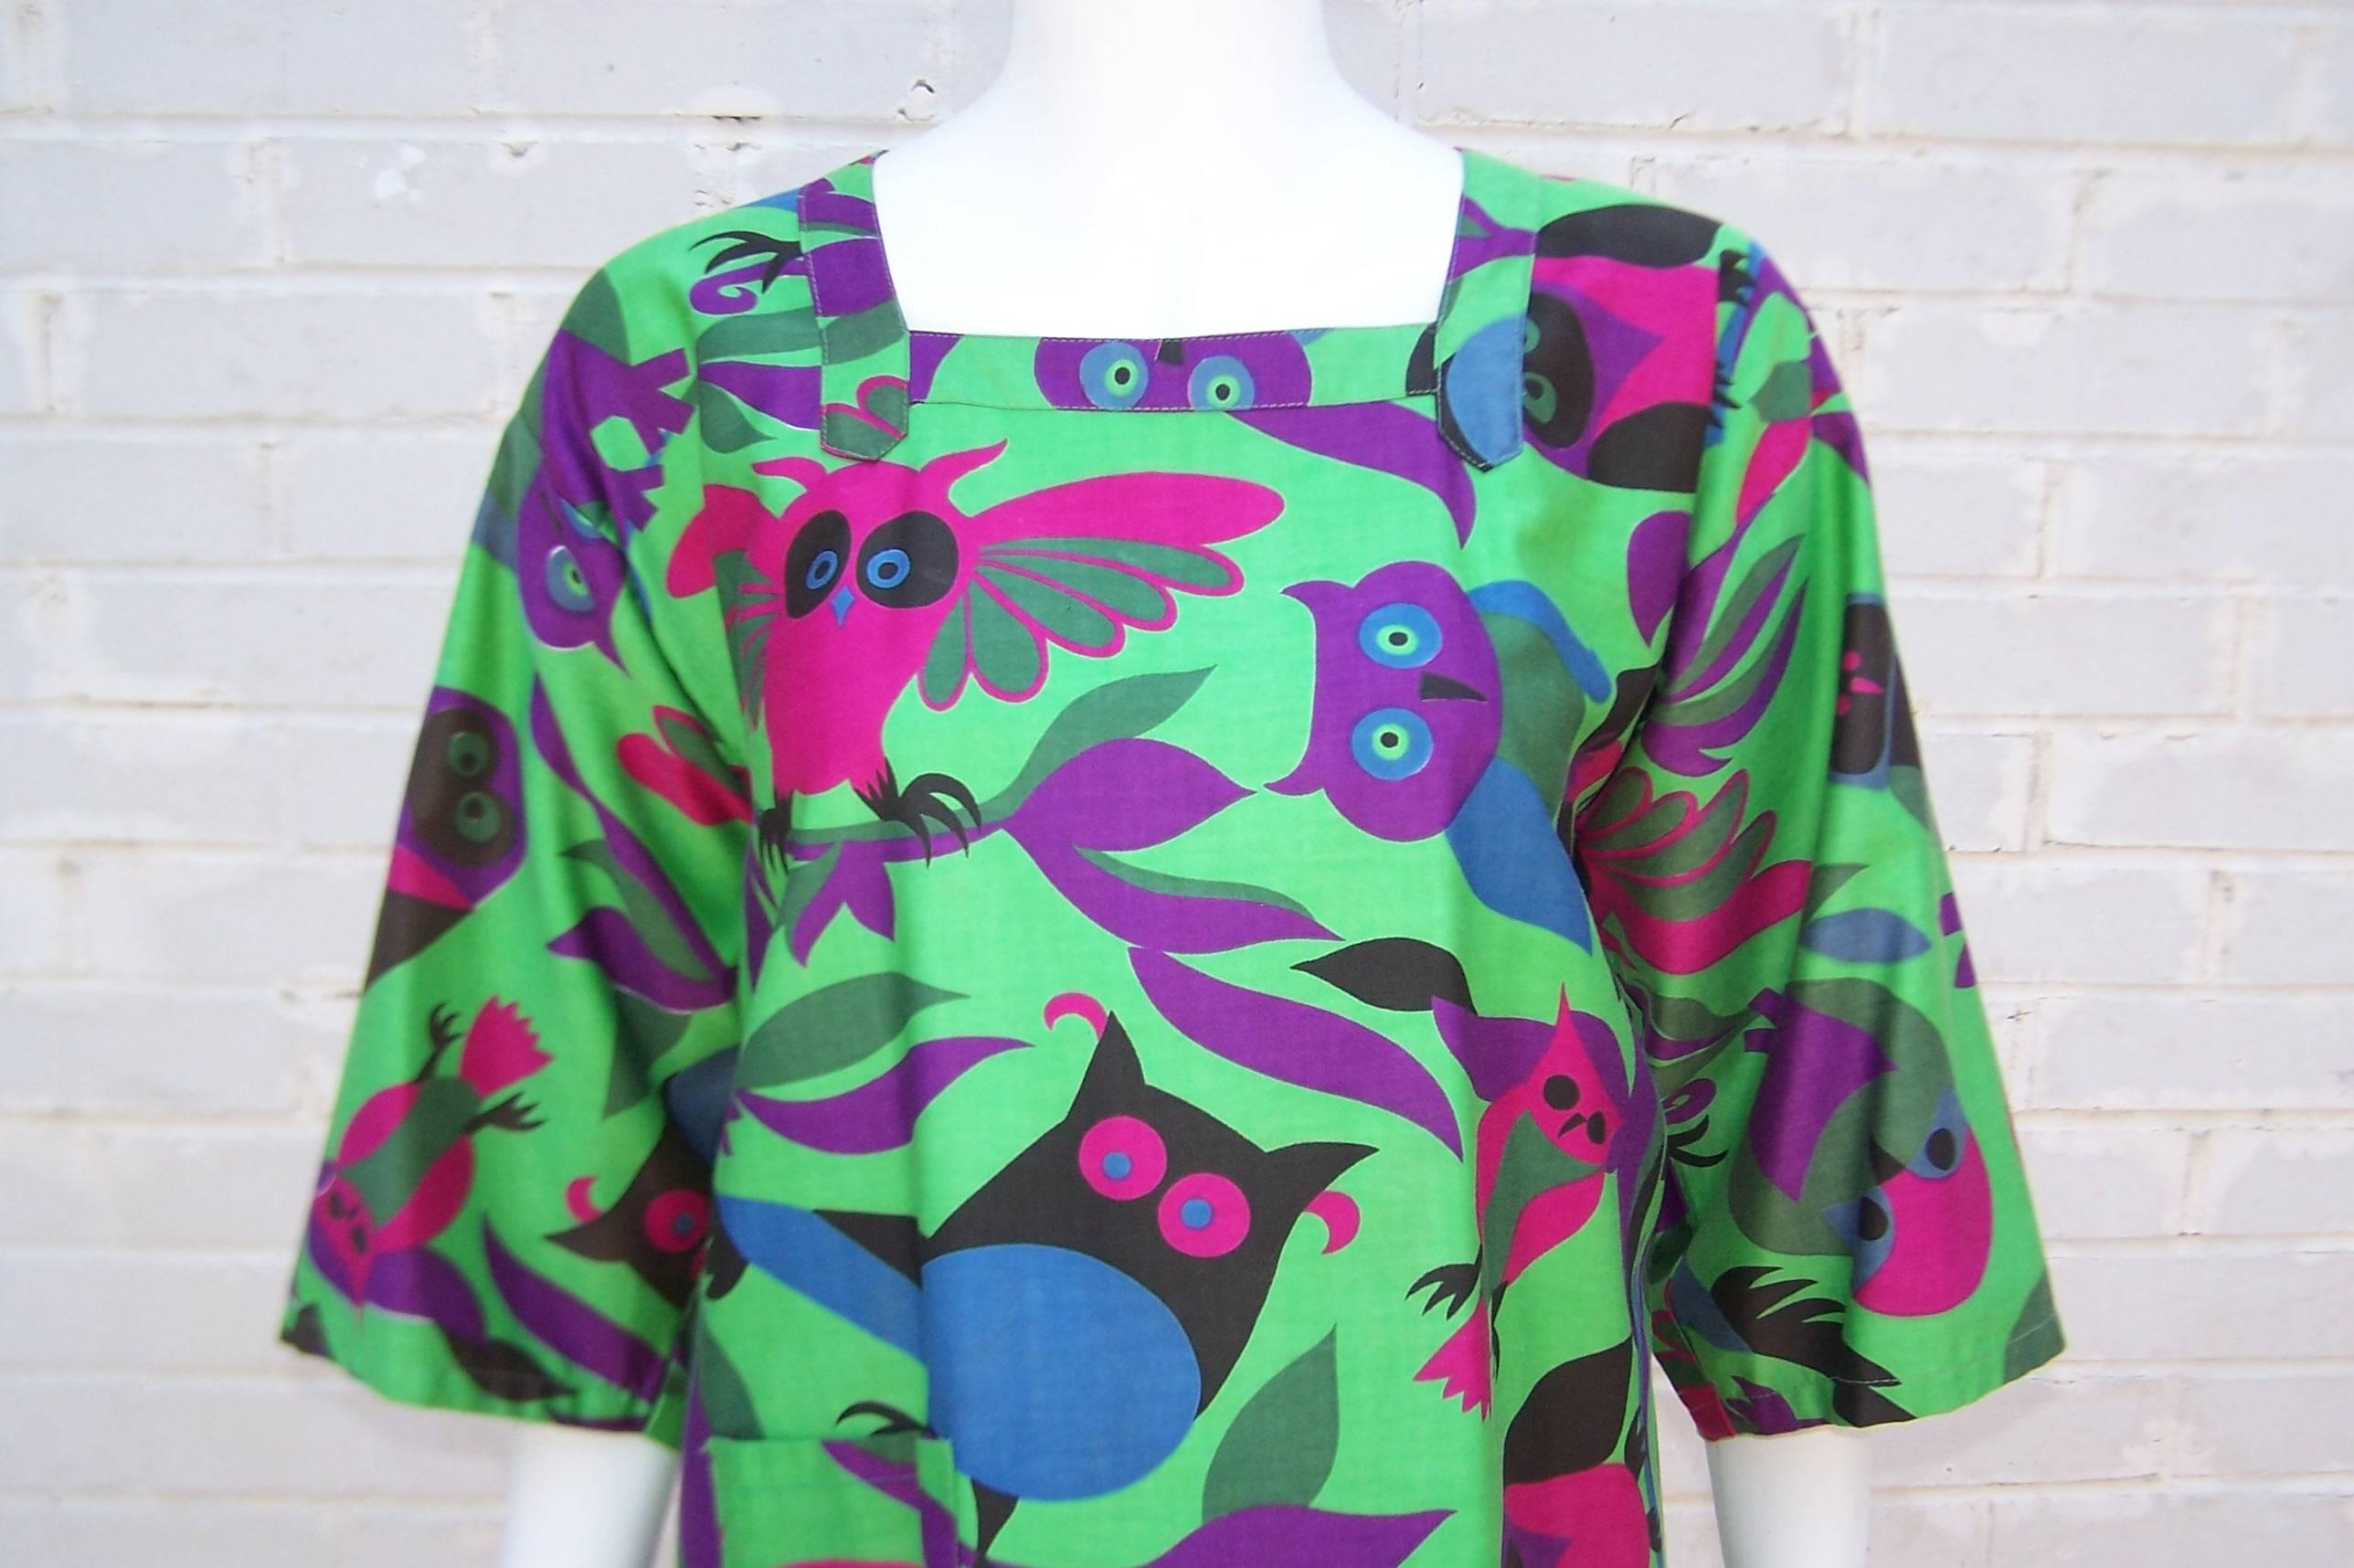 Women's Whimsical 1970's Design House Artist Smock Tunic With Owl Print